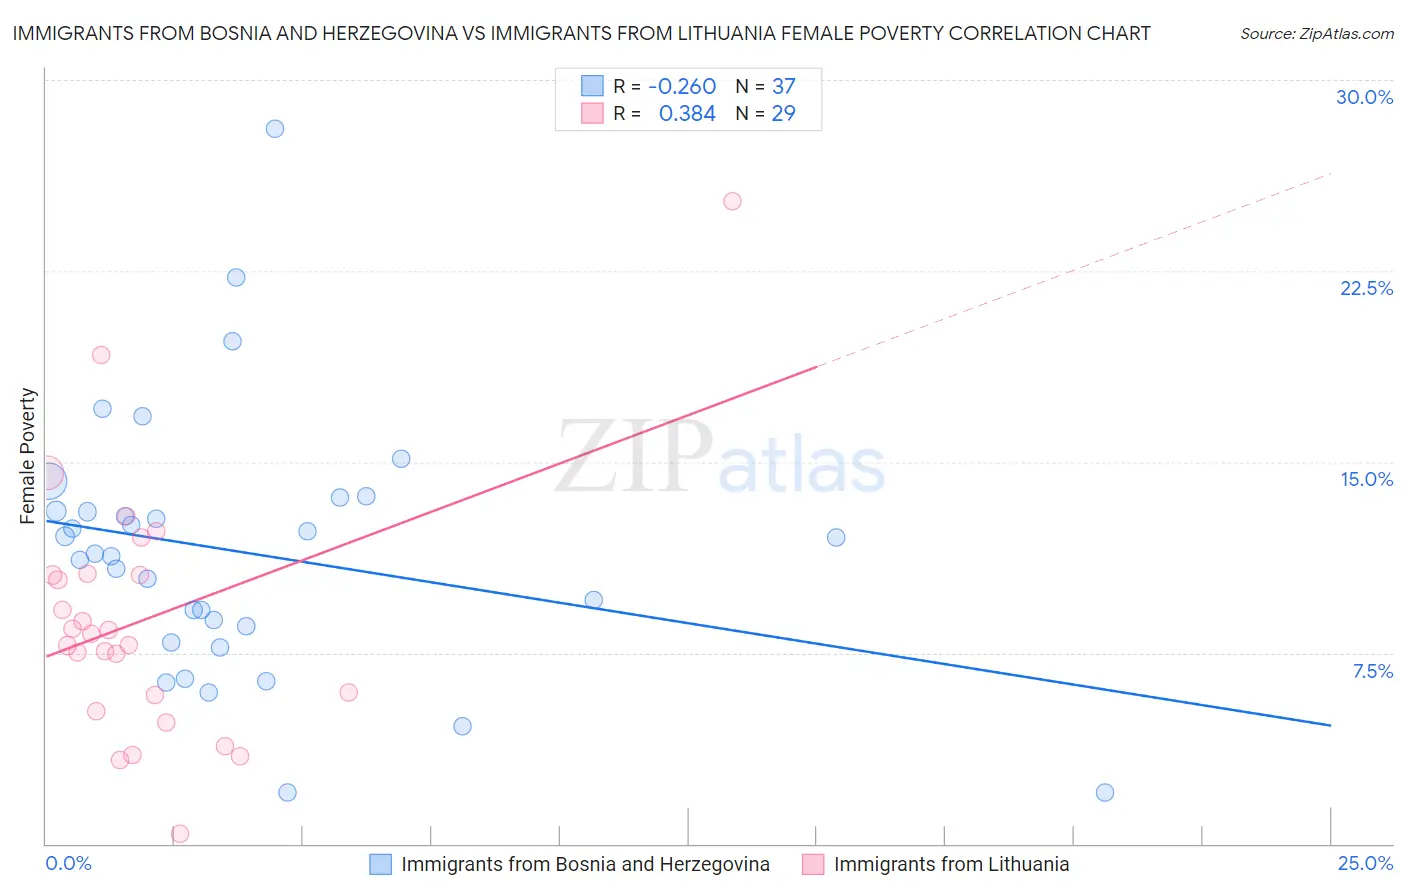 Immigrants from Bosnia and Herzegovina vs Immigrants from Lithuania Female Poverty